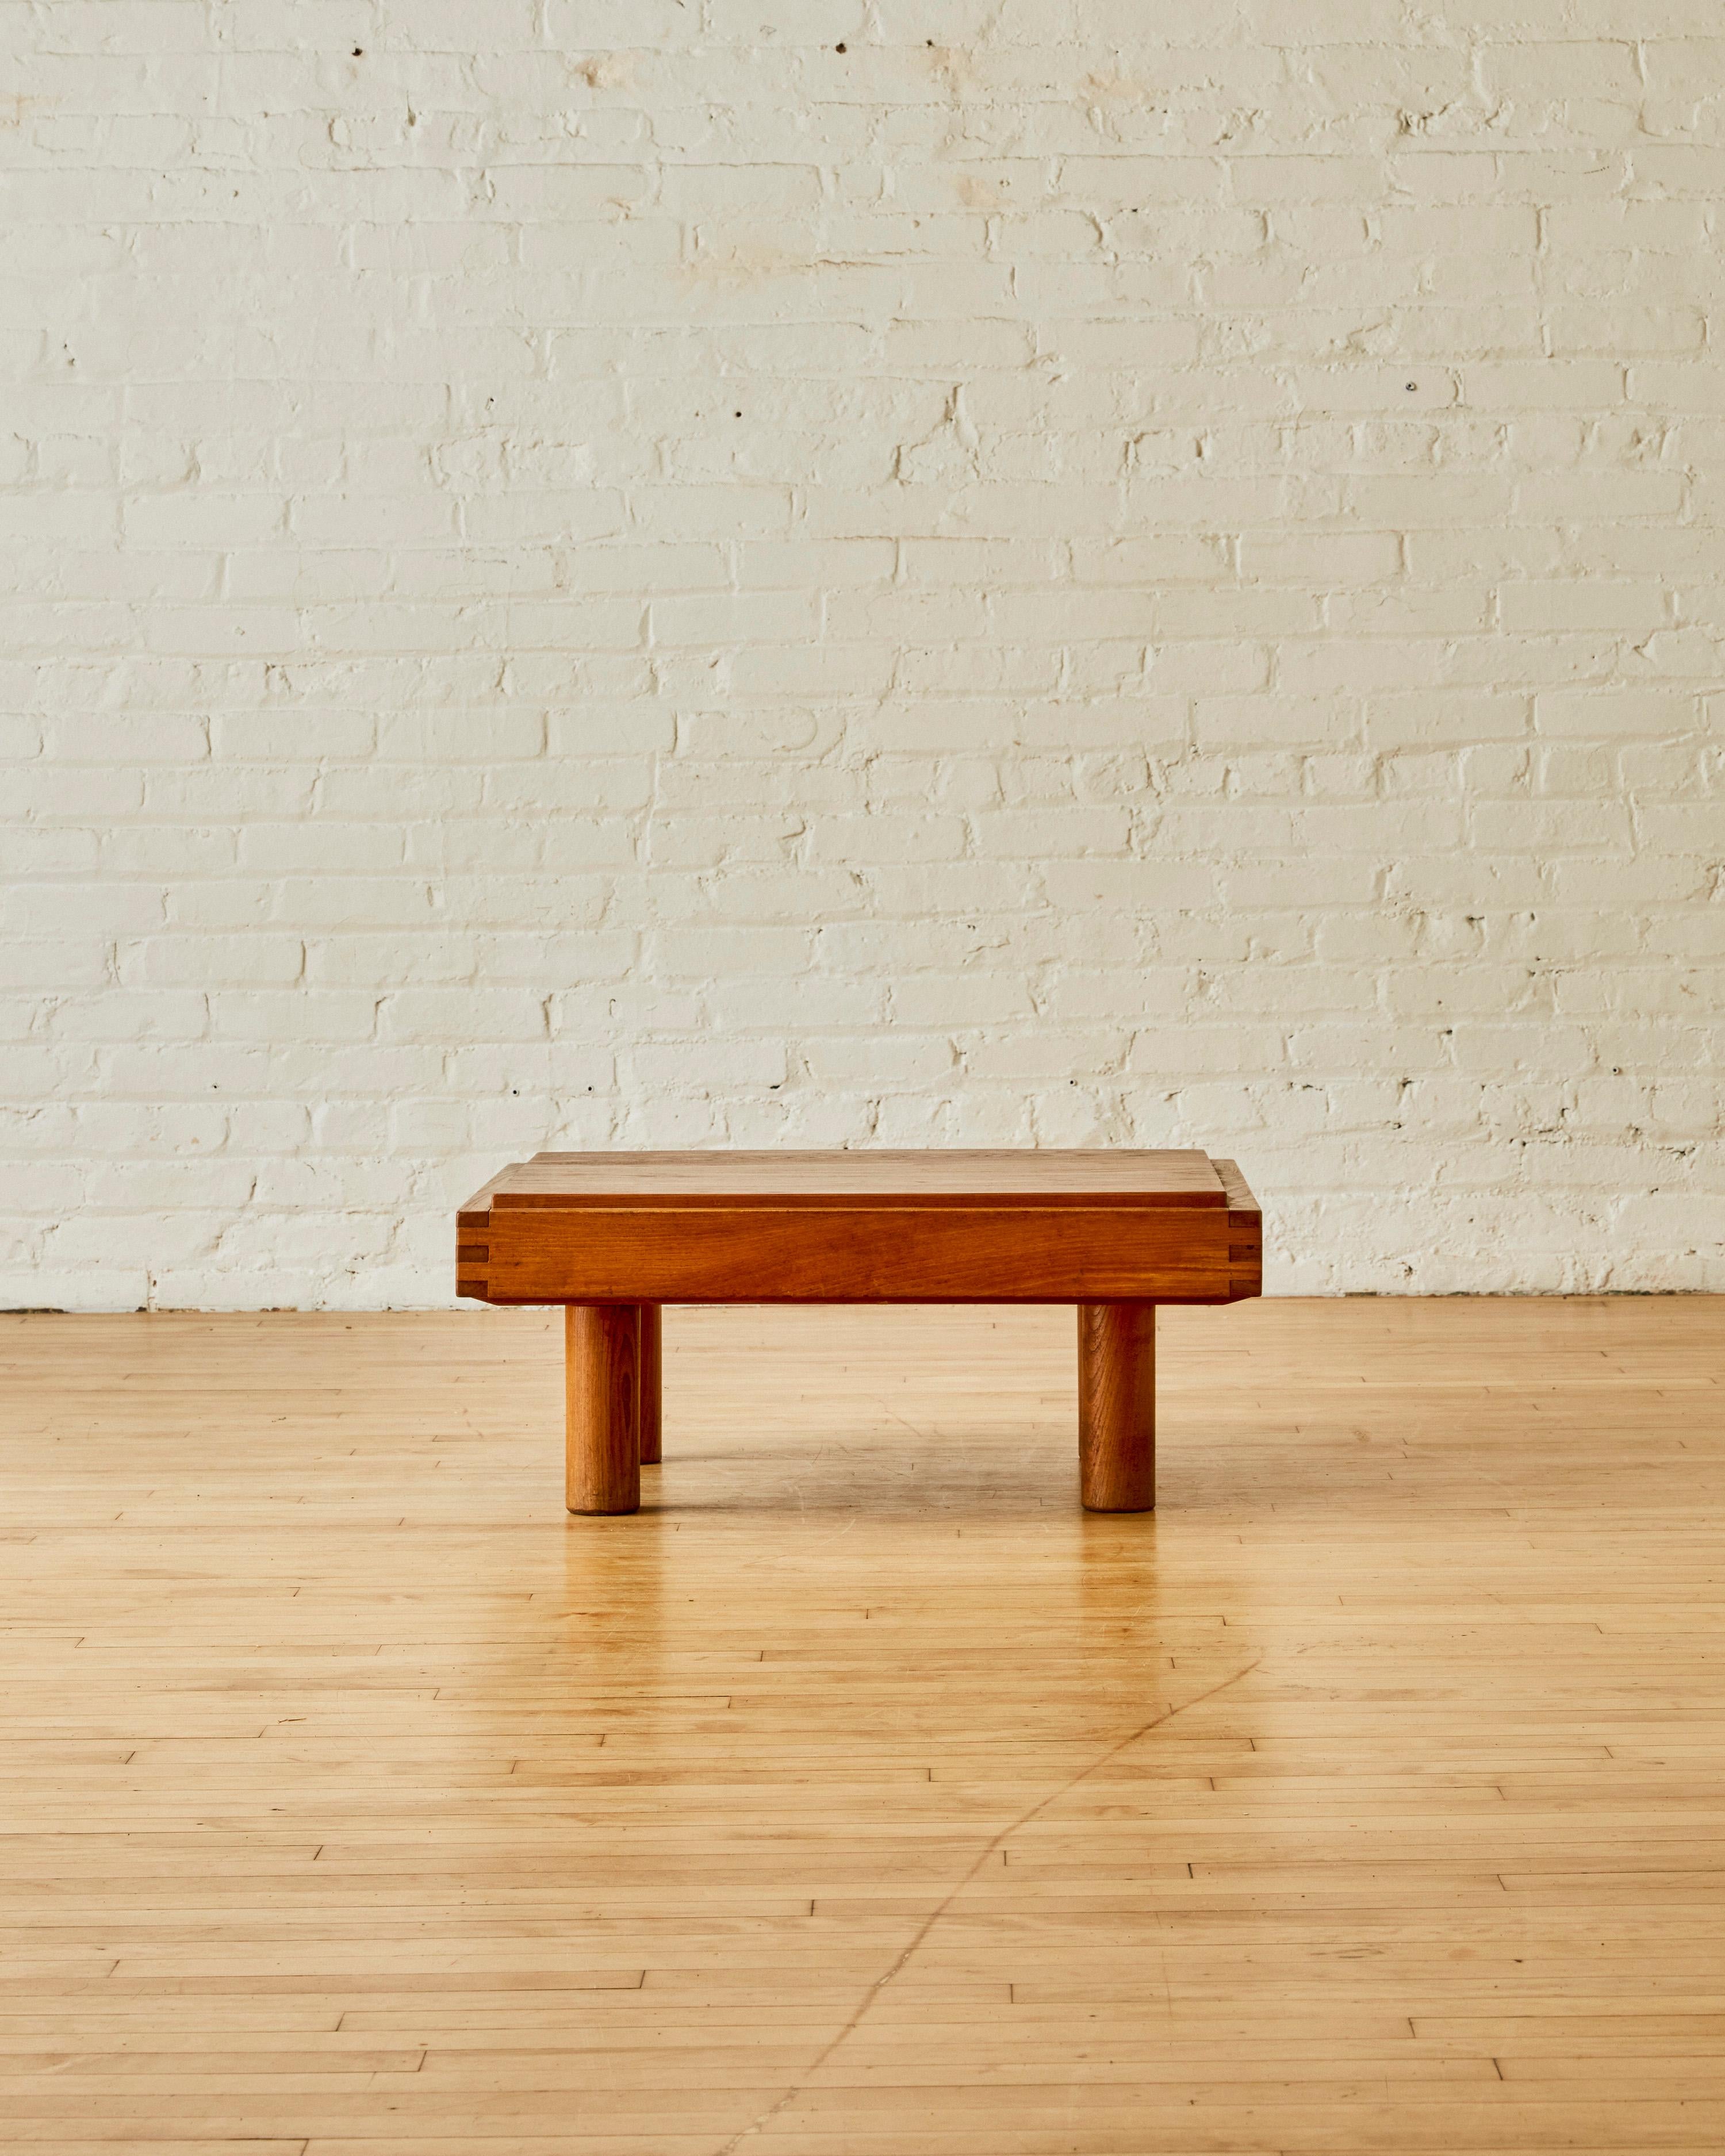 'LO9A' Bench Seat by Pierre Chapo in elm wood. C. 1960

Pierre Chapo (1927-1987) was a French furniture designer and craftsman who was active in the mid-20th century. He is known for his minimalist and functional designs, which were inspired by